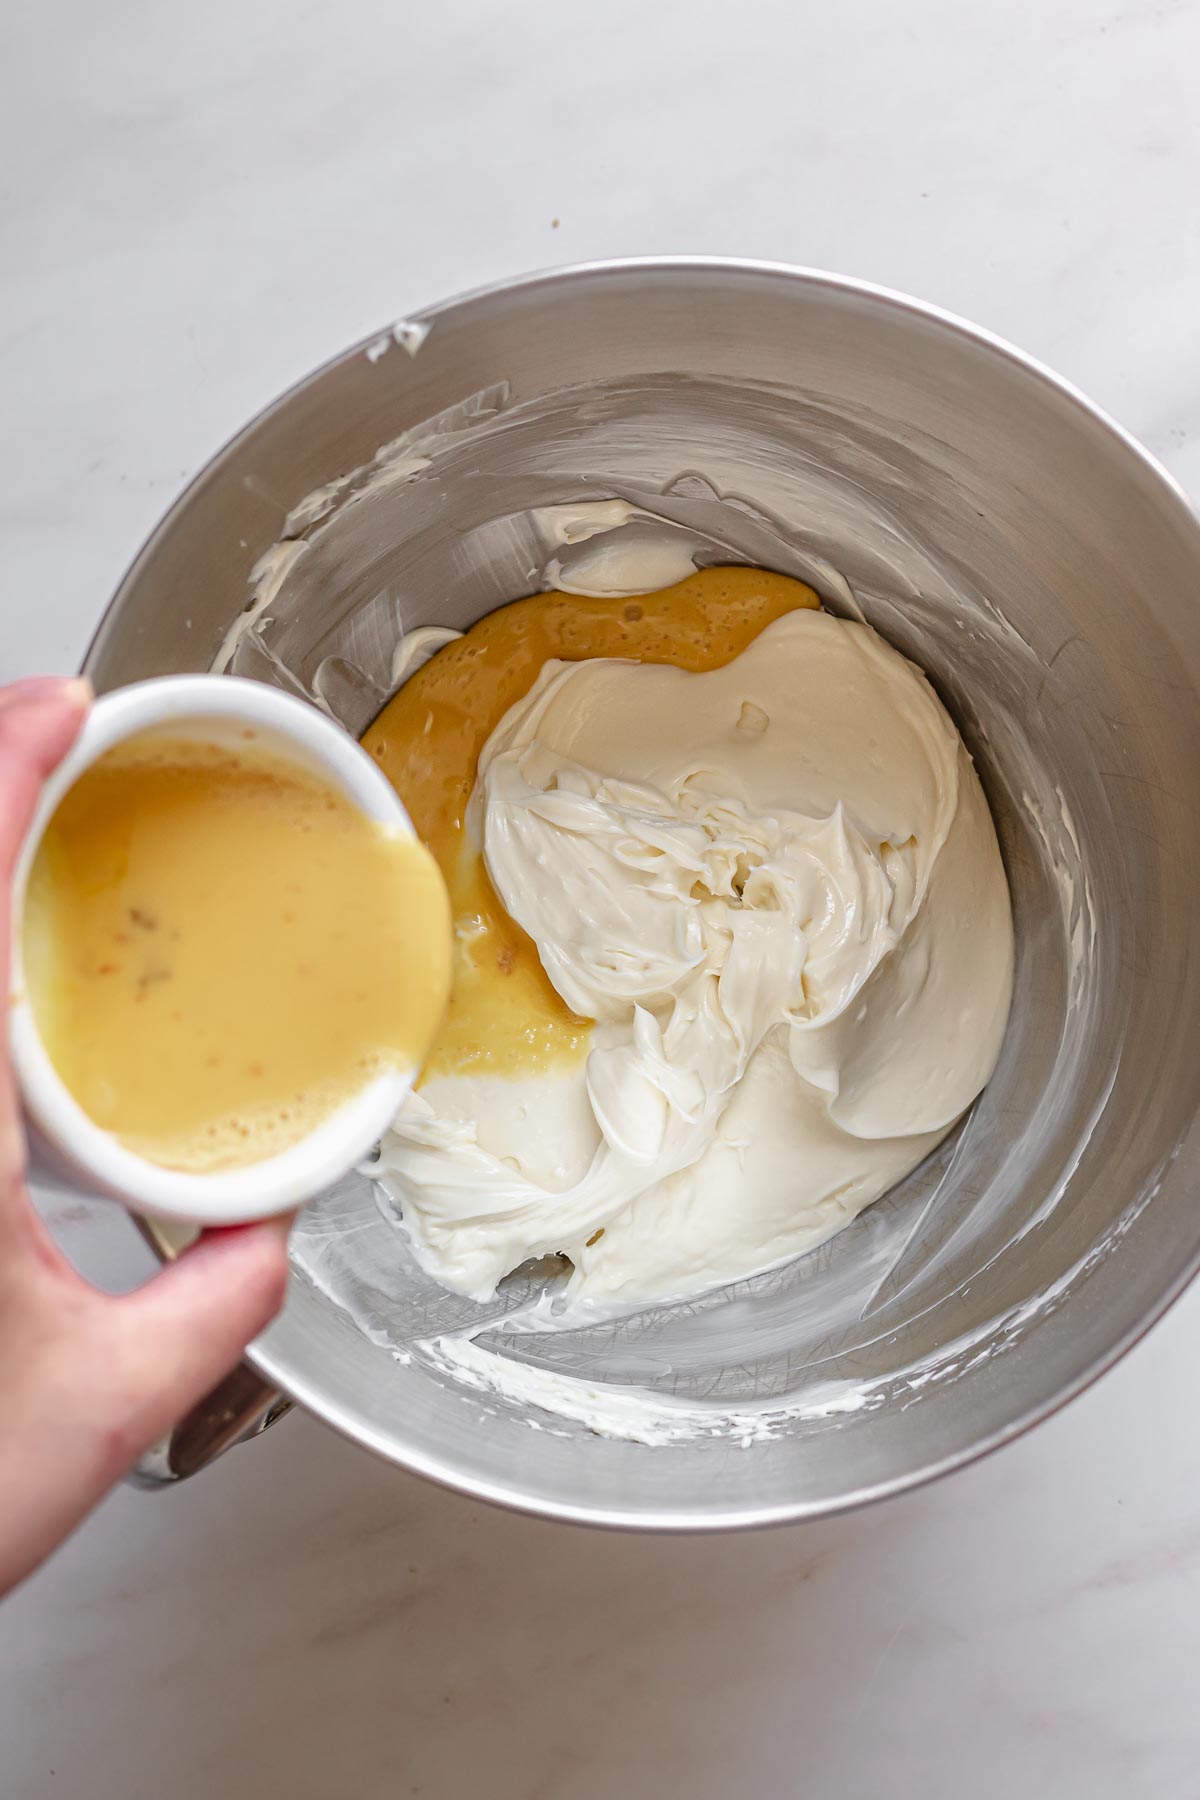 Whisked eggs being added to a bowl of cream cheese.